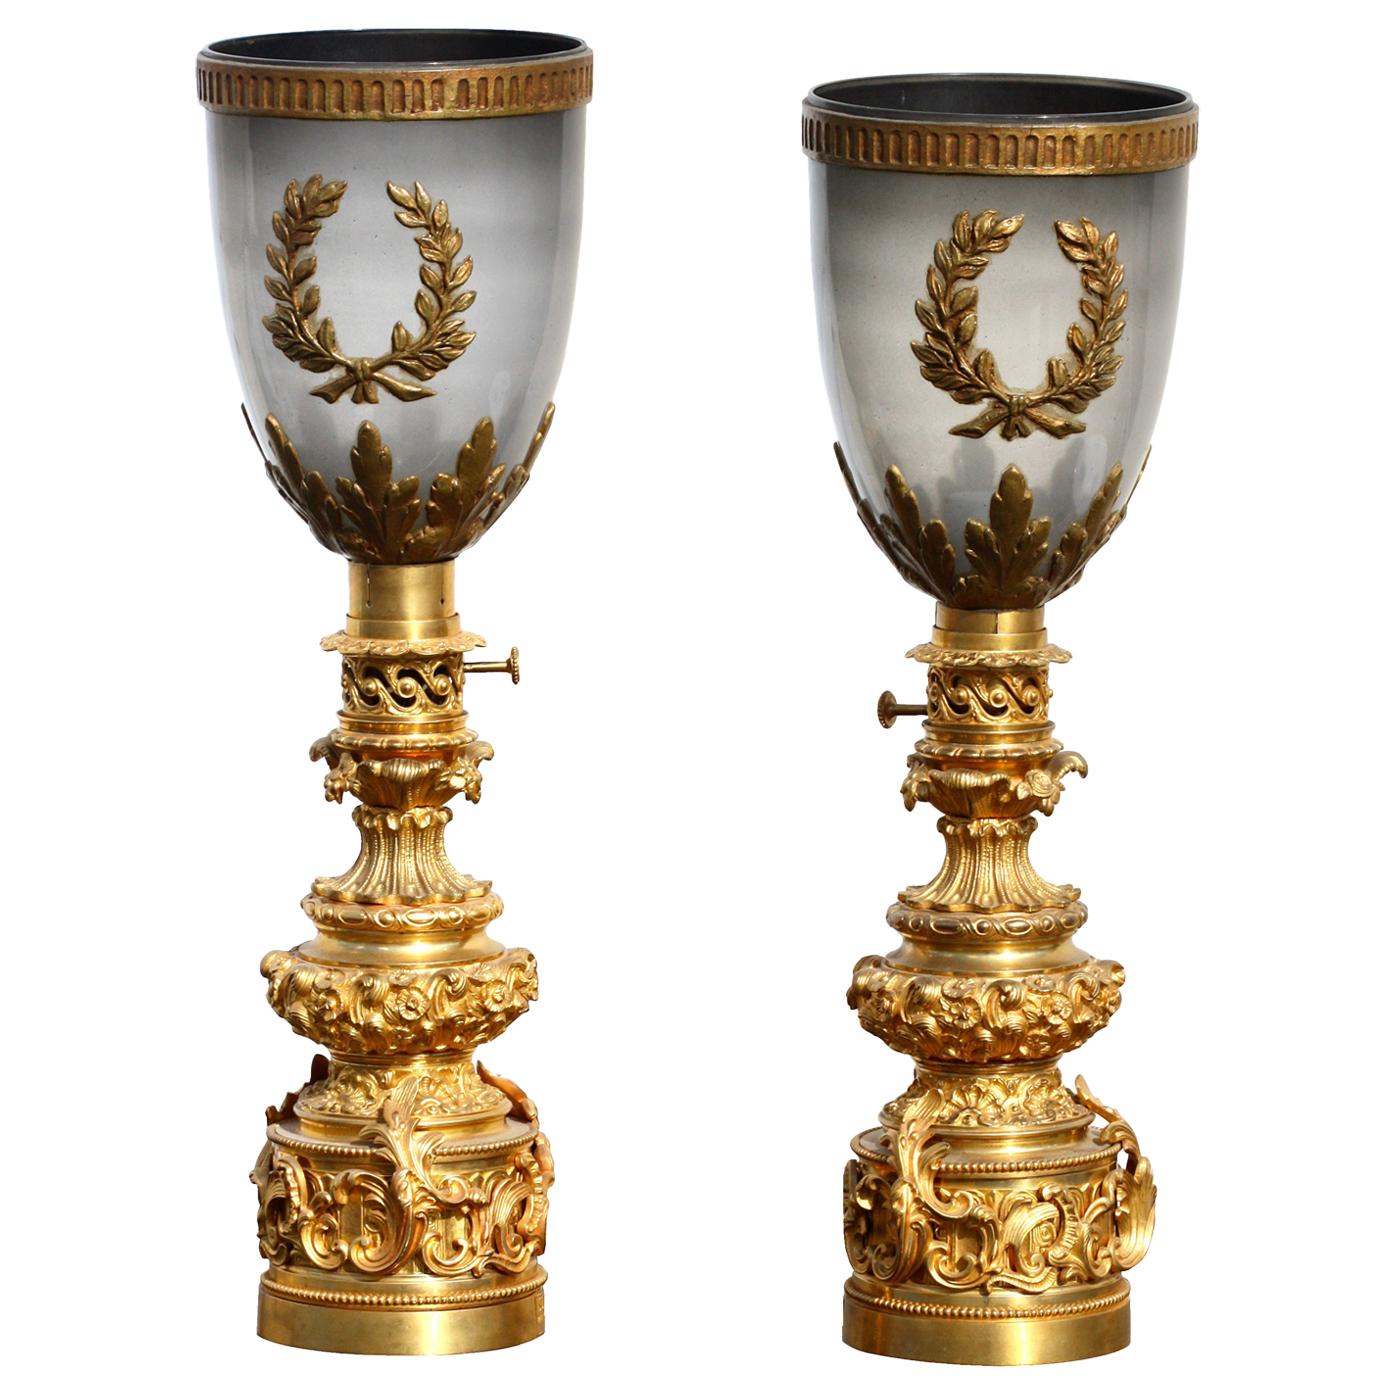 Pair of Gilt-Bronze Lamps in the French Restauration Style